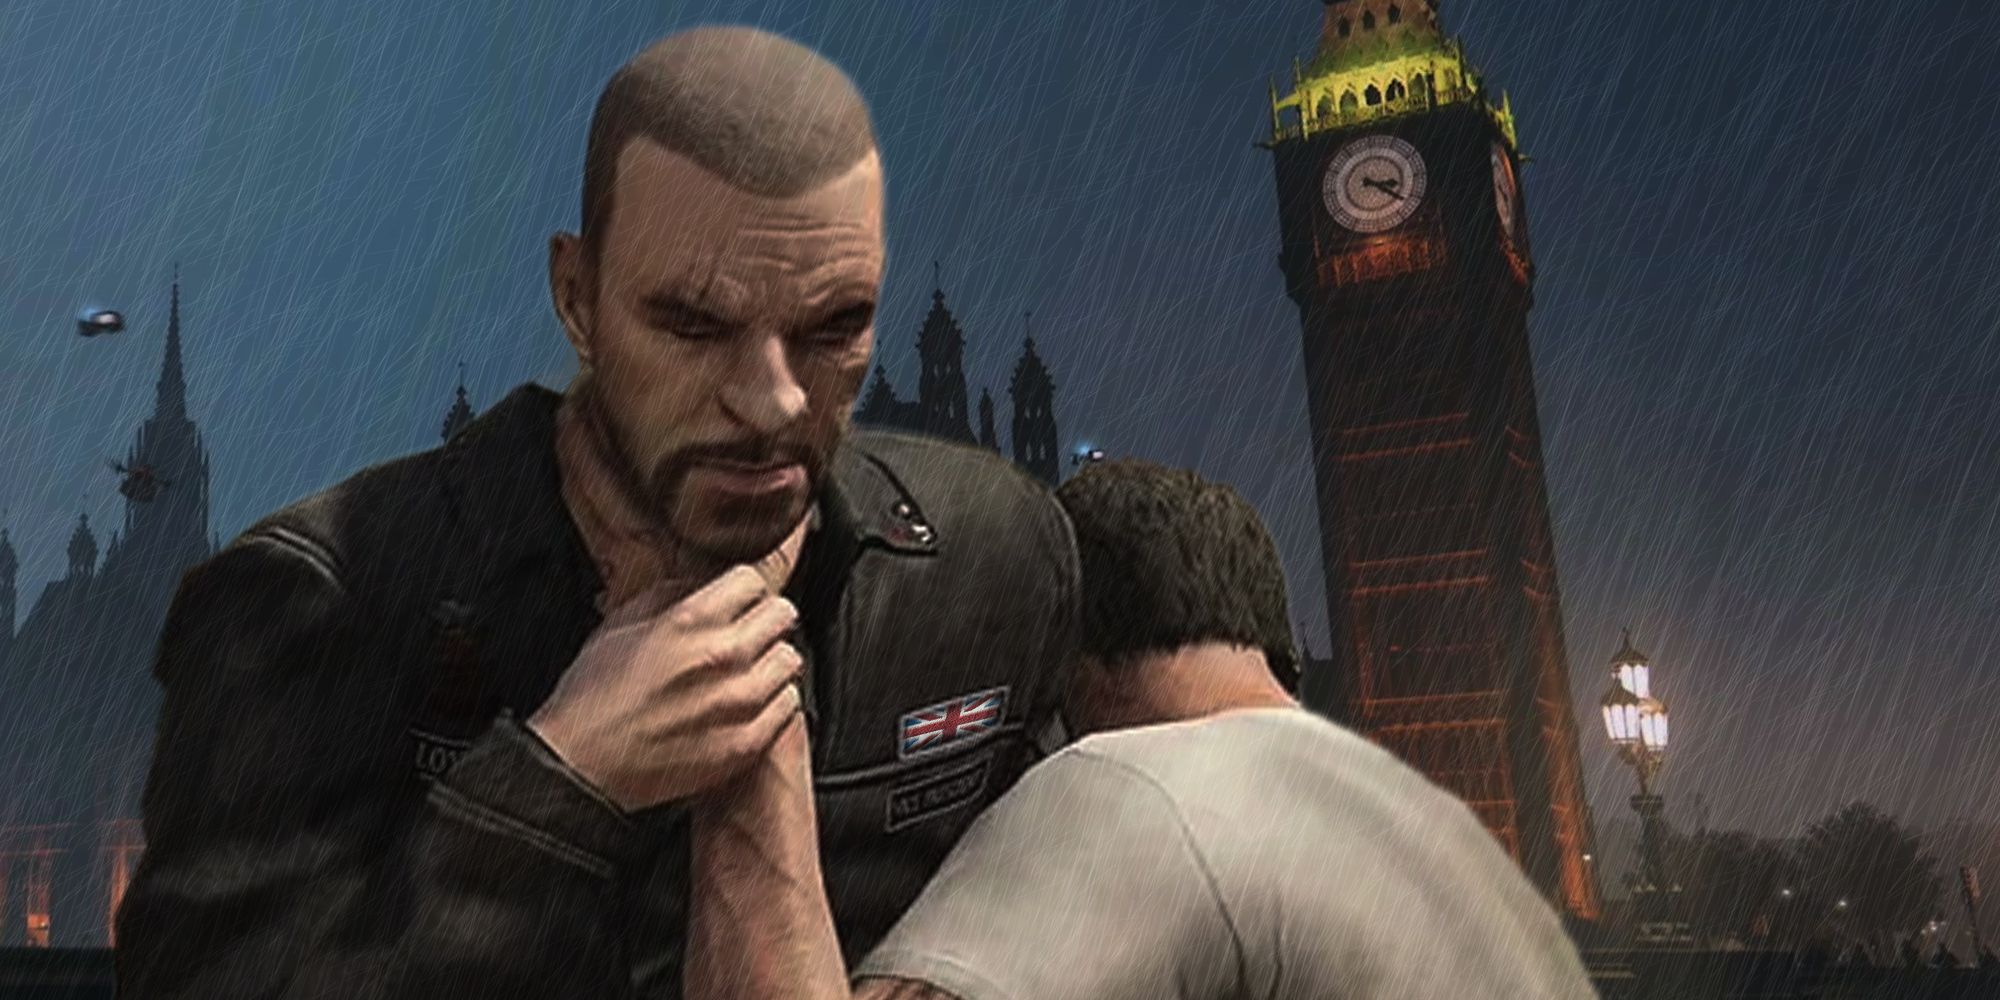 Trevor from GTA attacking someone with London in the background